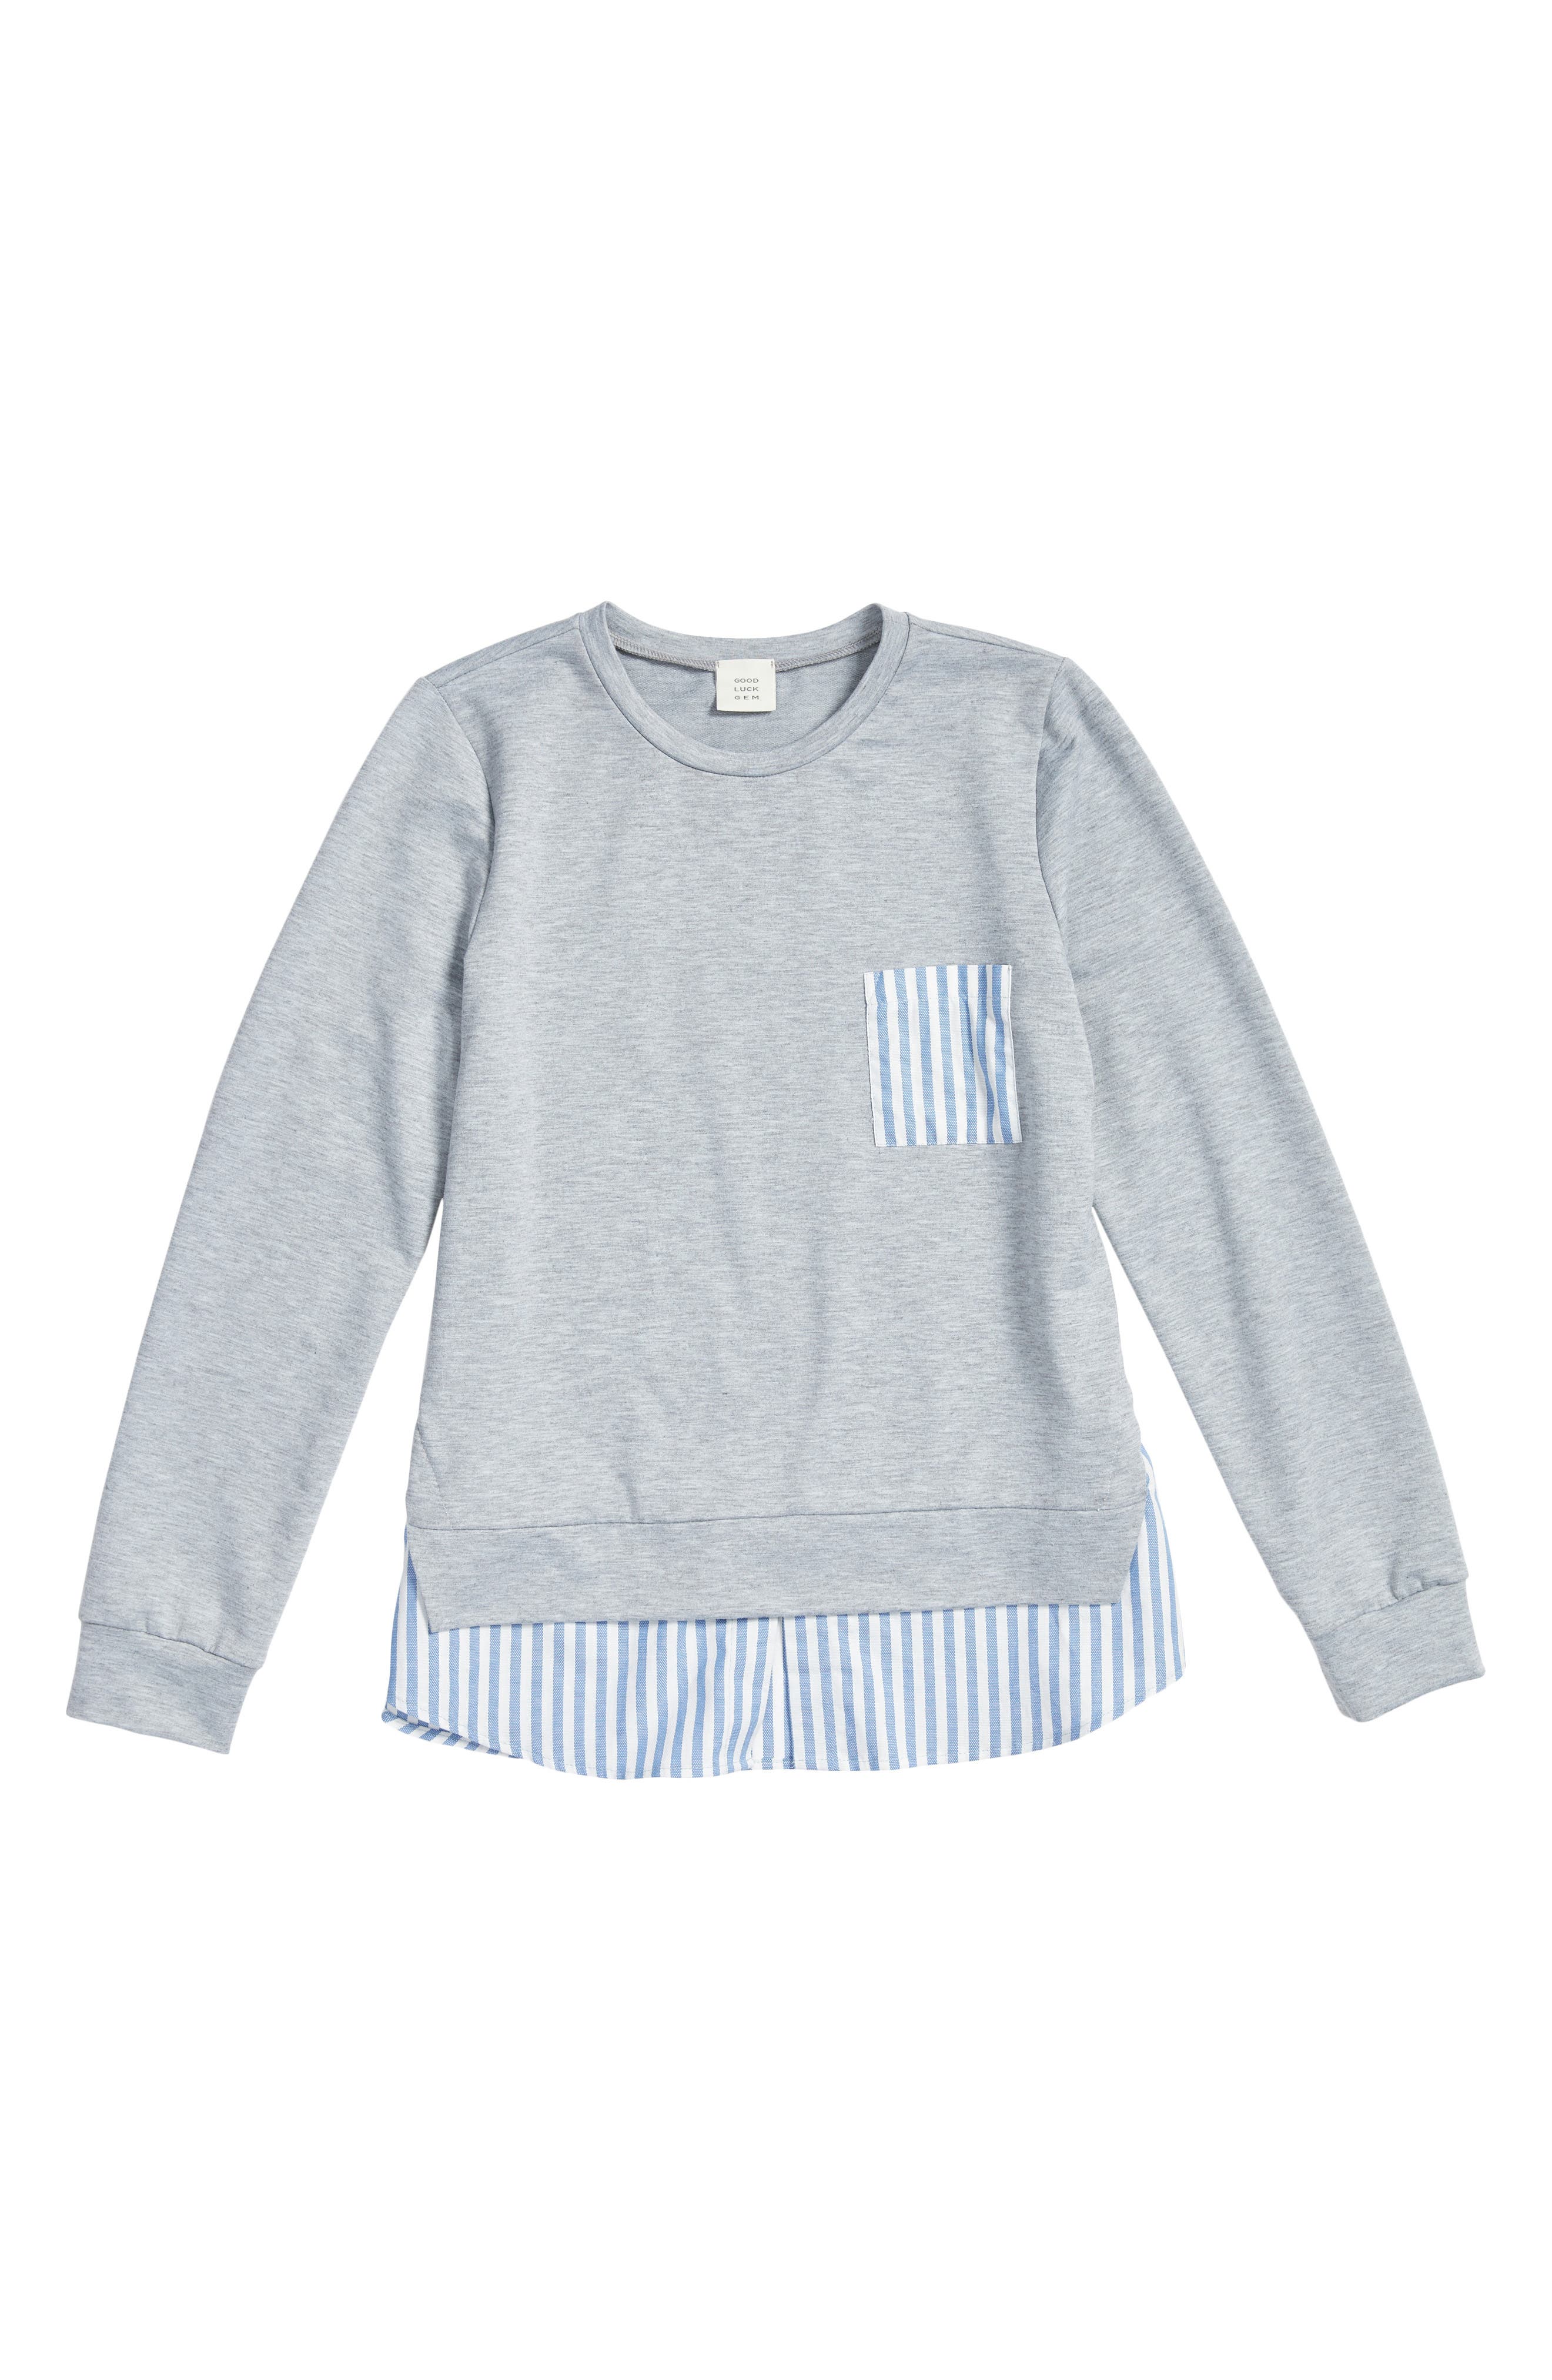 Hoodies for Girls, Sweaters & More | Nordstrom